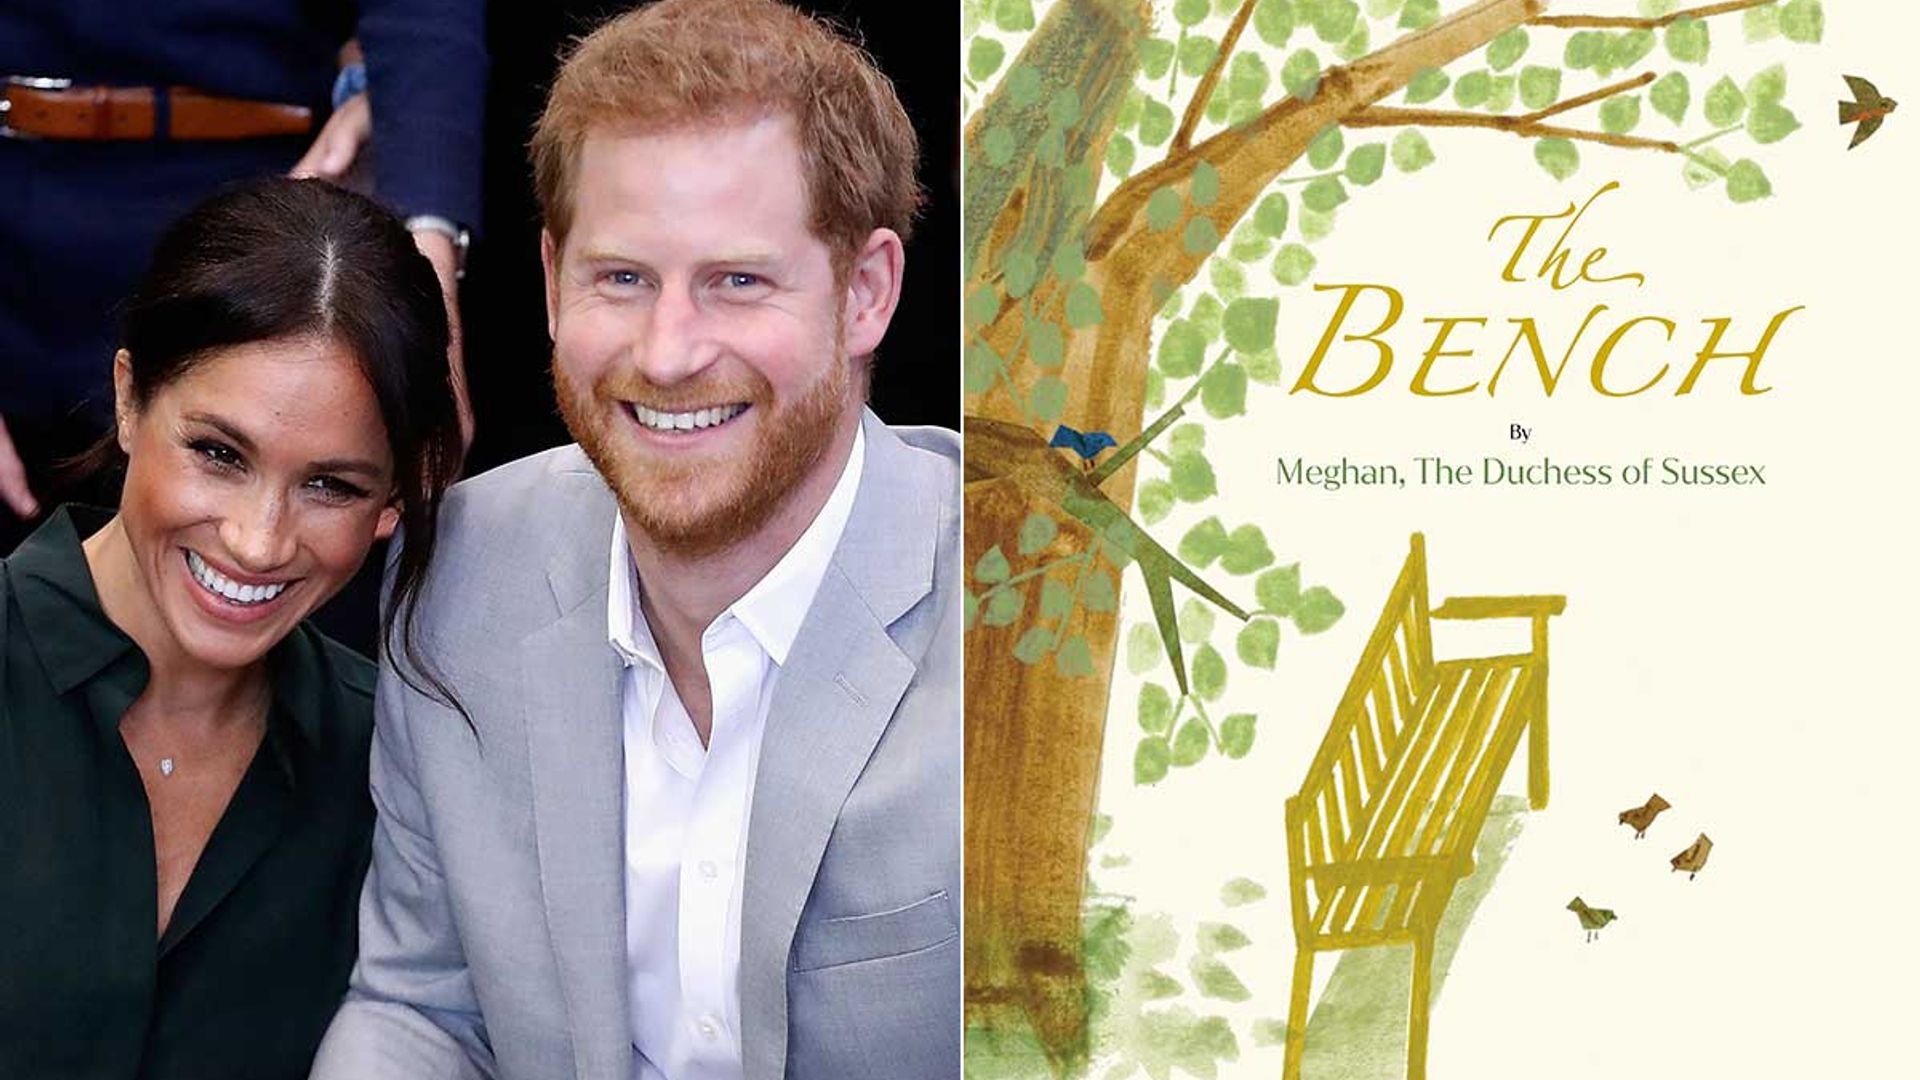 Meghan Markle's sweet reference to Prince Harry in new book almost went unnoticed